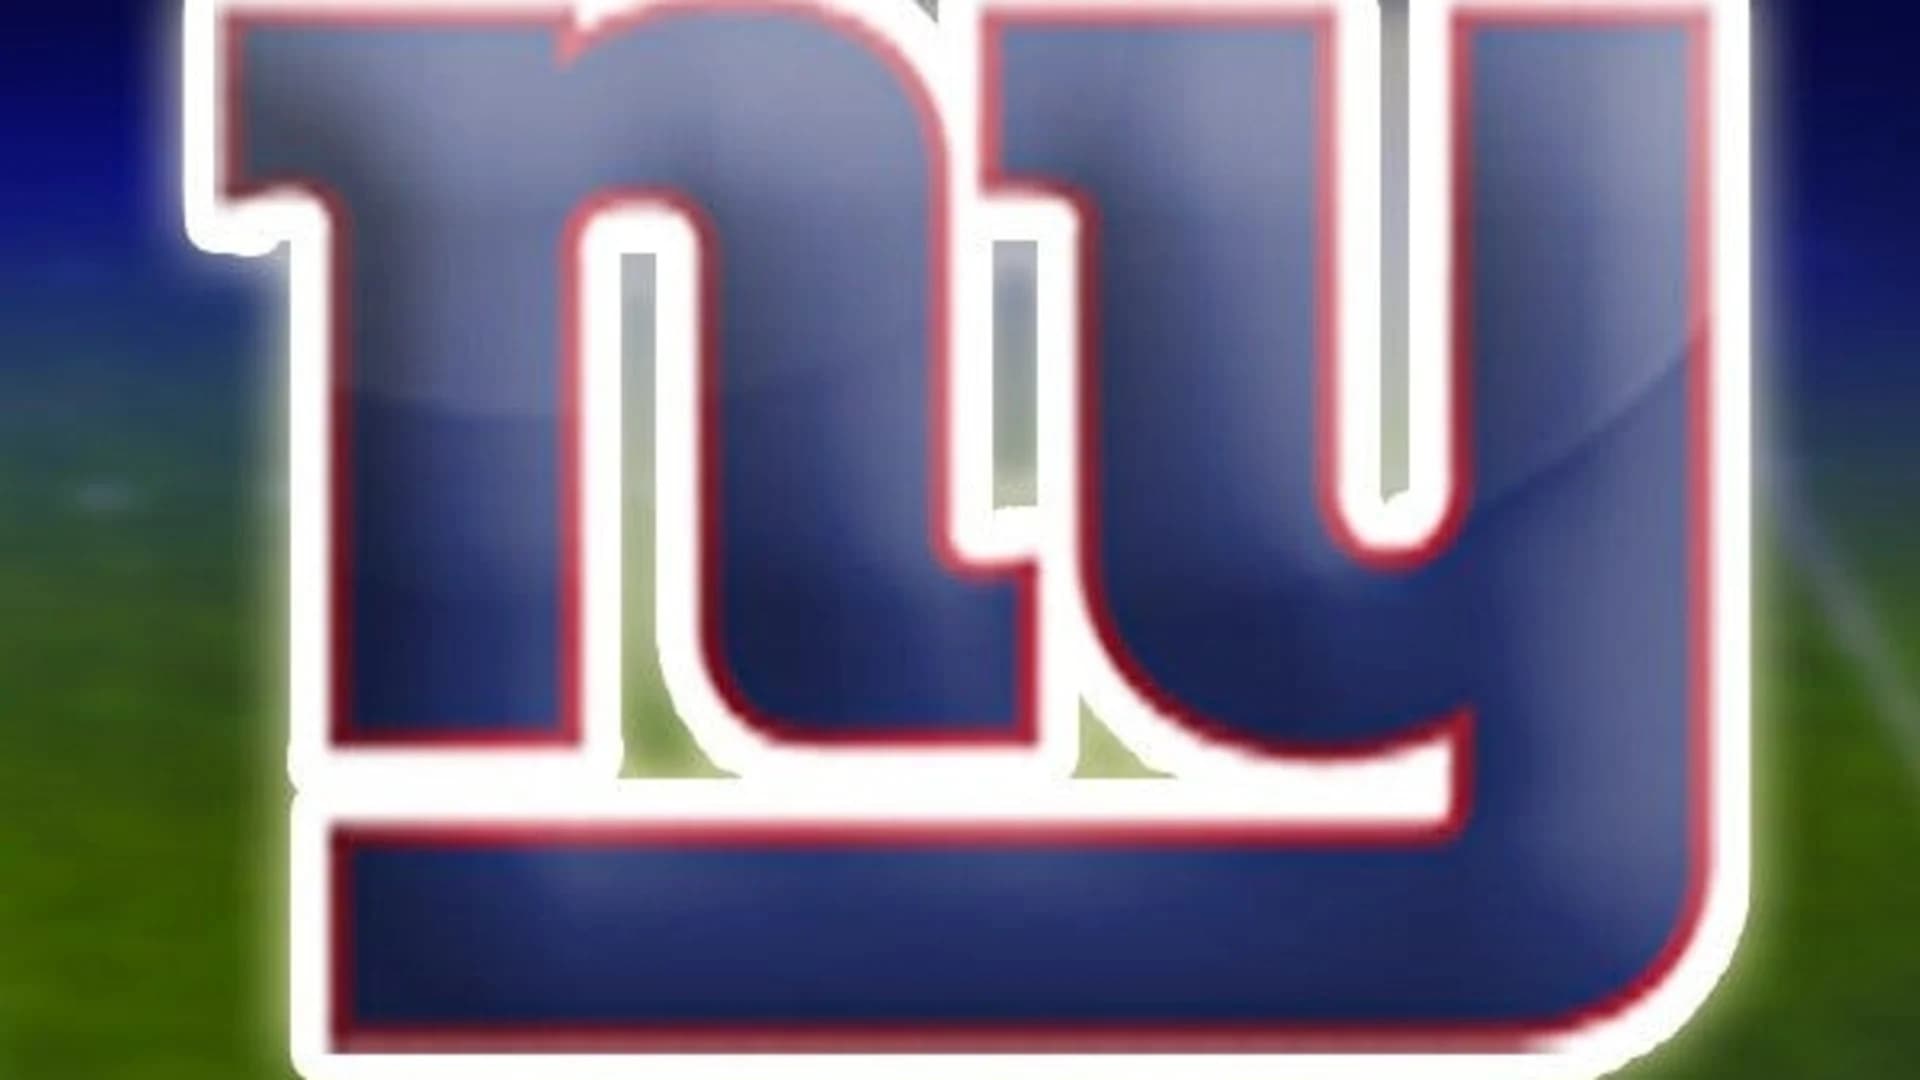 New York Giants dedicate game to first responders, donate 100 tickets to officers